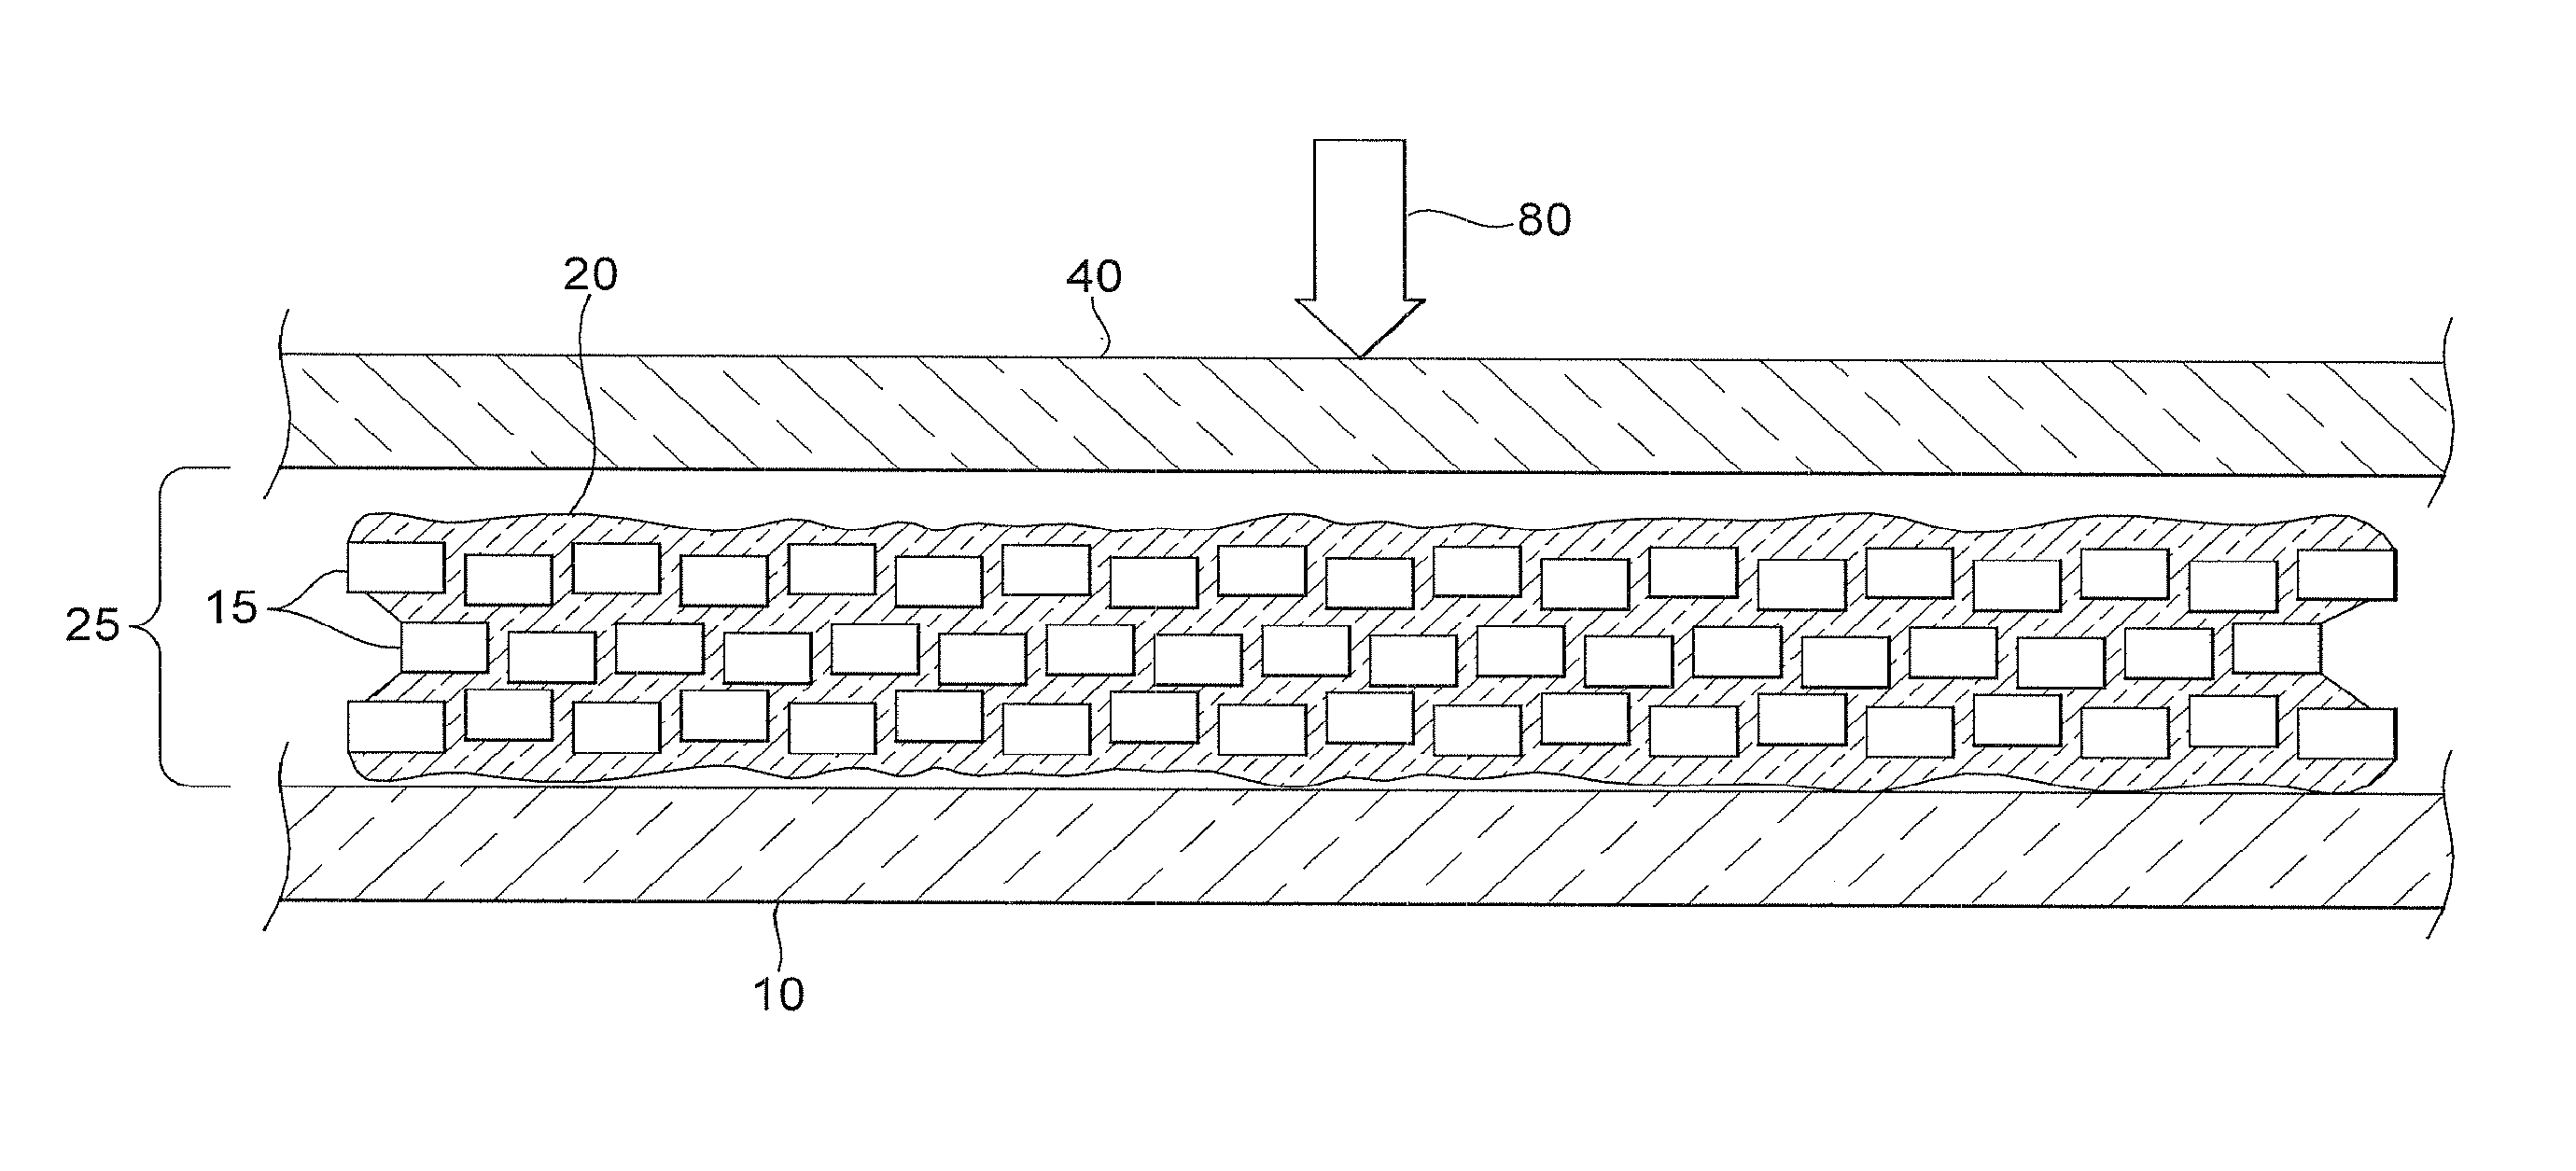 Hermetically sealed electronic device using coated glass flakes